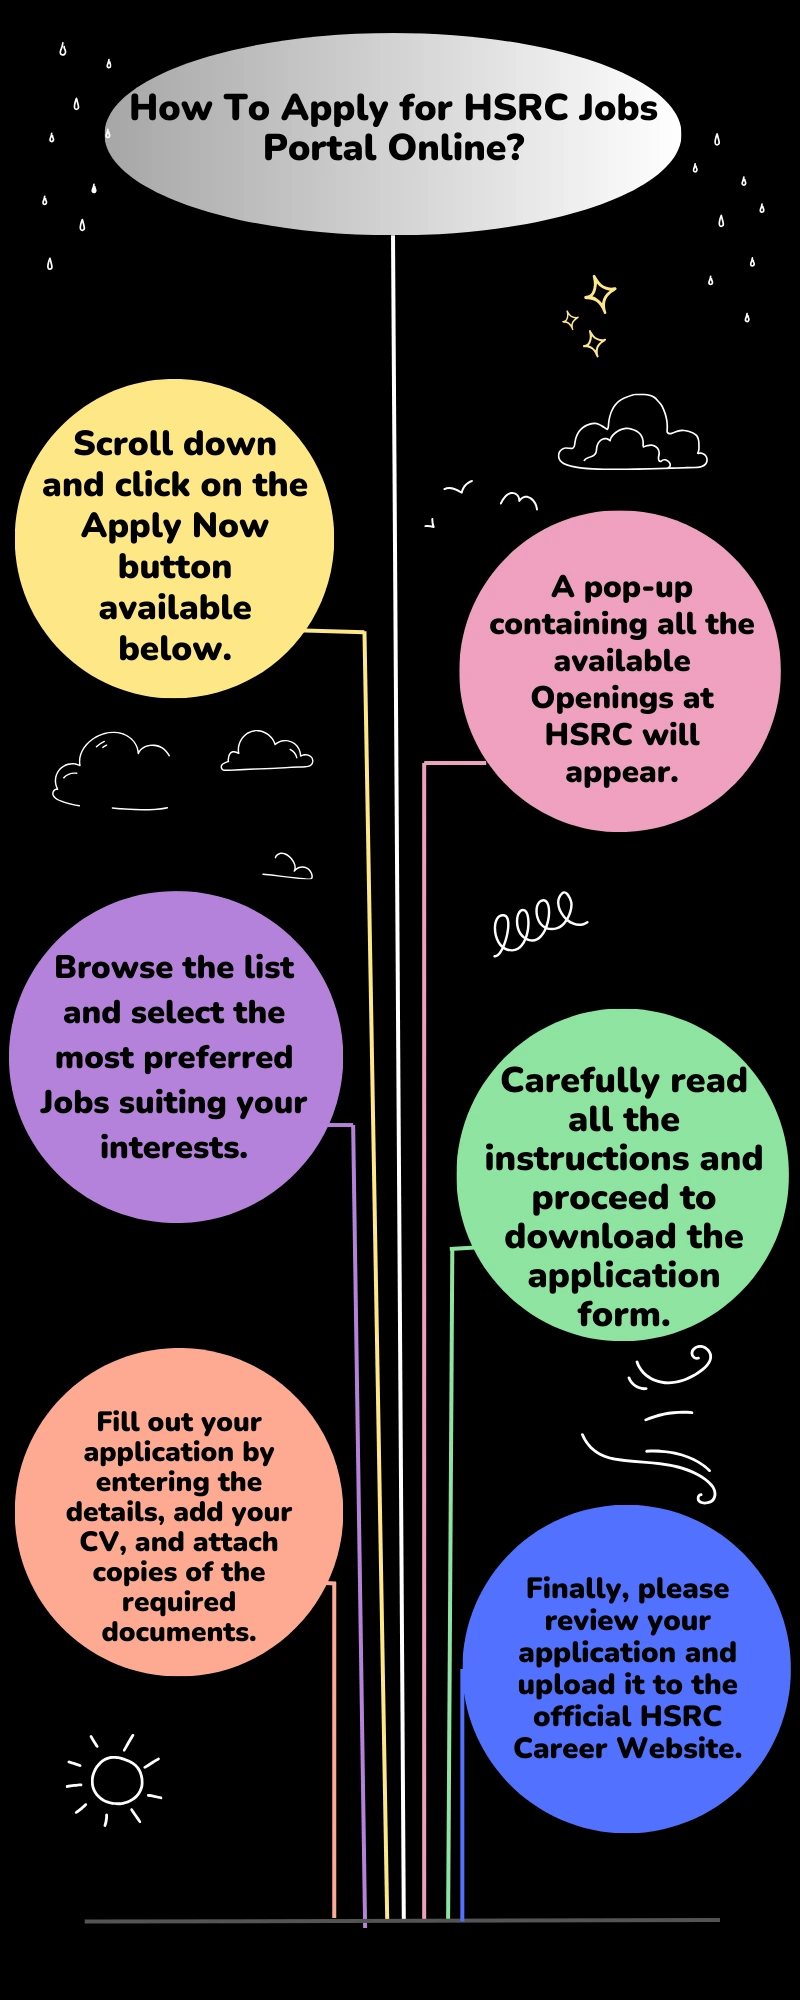 How To Apply for HSRC Jobs Portal Online?